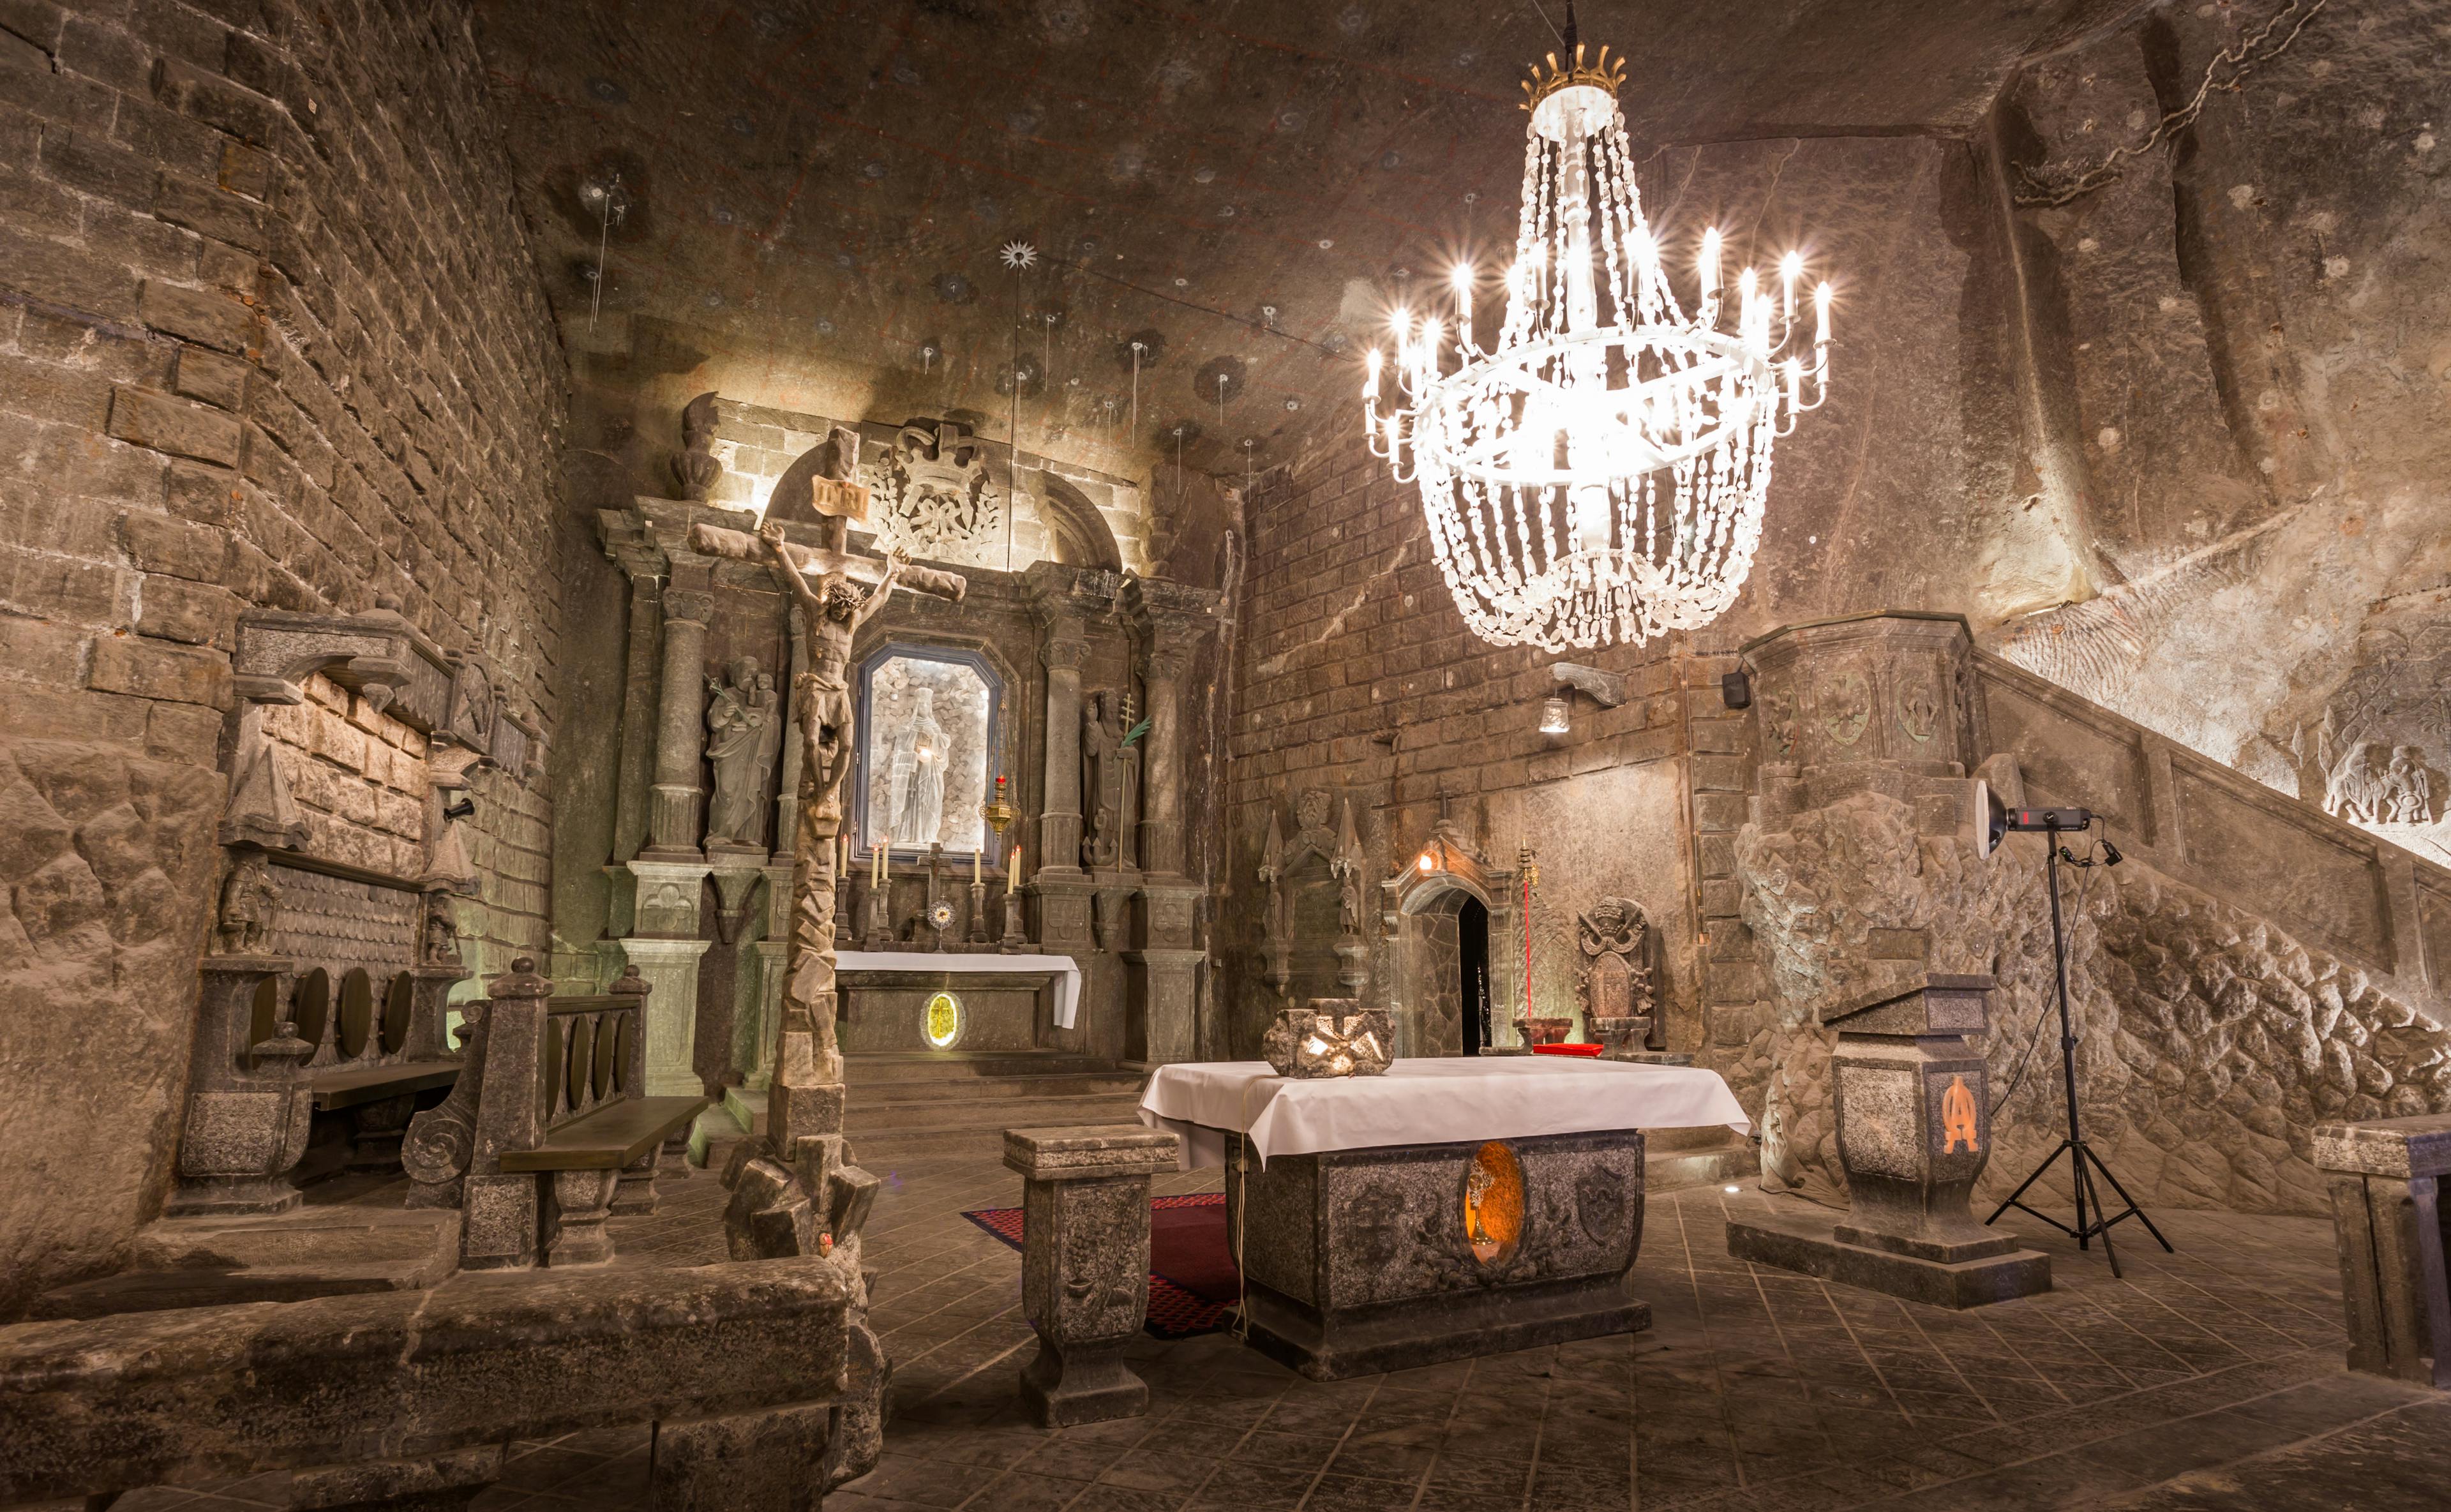 This underground mine in Poland is home to a cathedral and 40 chapels